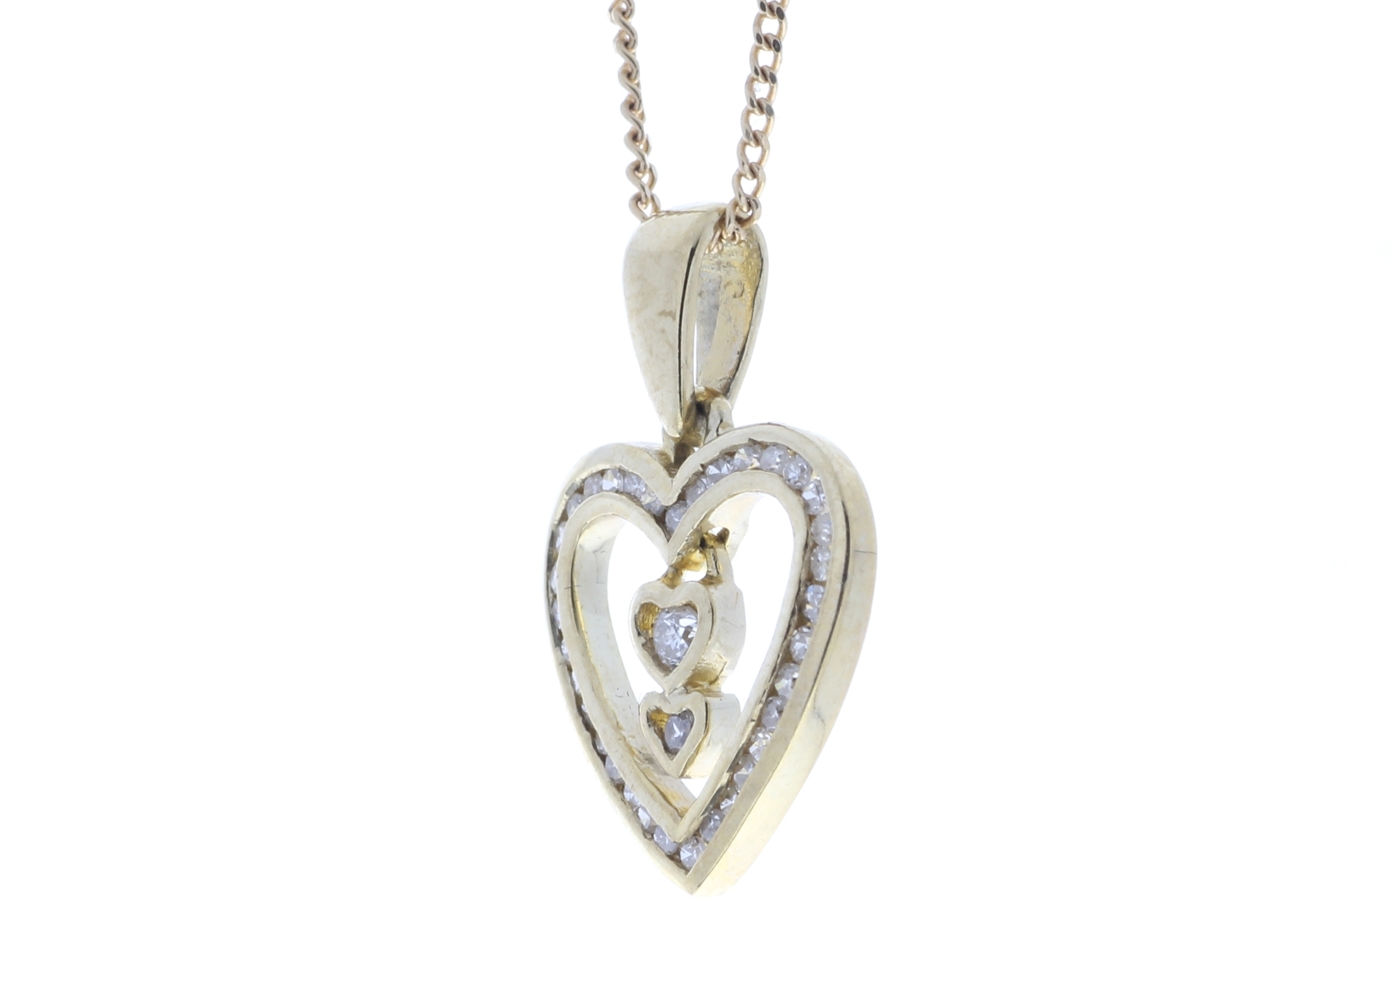 9ct Yellow Gold Heart Pendant 0.21 Carats - Image 4 of 5